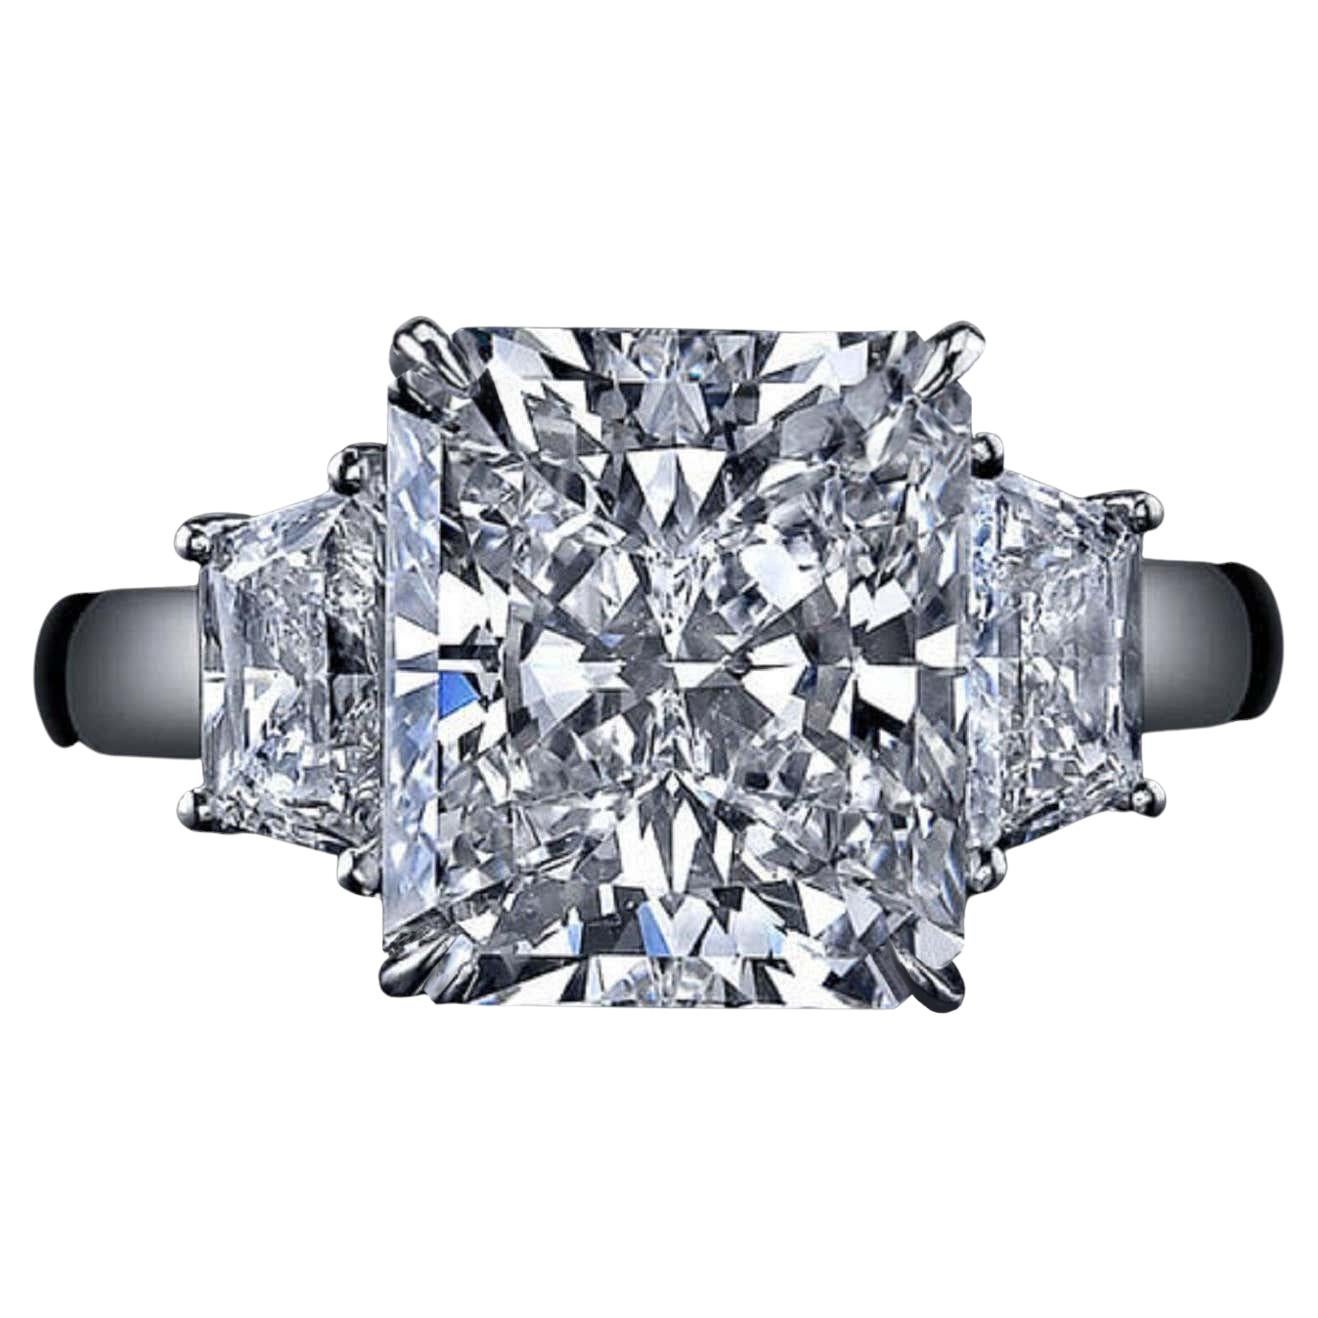 GIA Certified Three Stone Radiant Cut Trapezoid Diamond Ring 
the main stone weighs 2.50 carats and has g color vs1 clarity